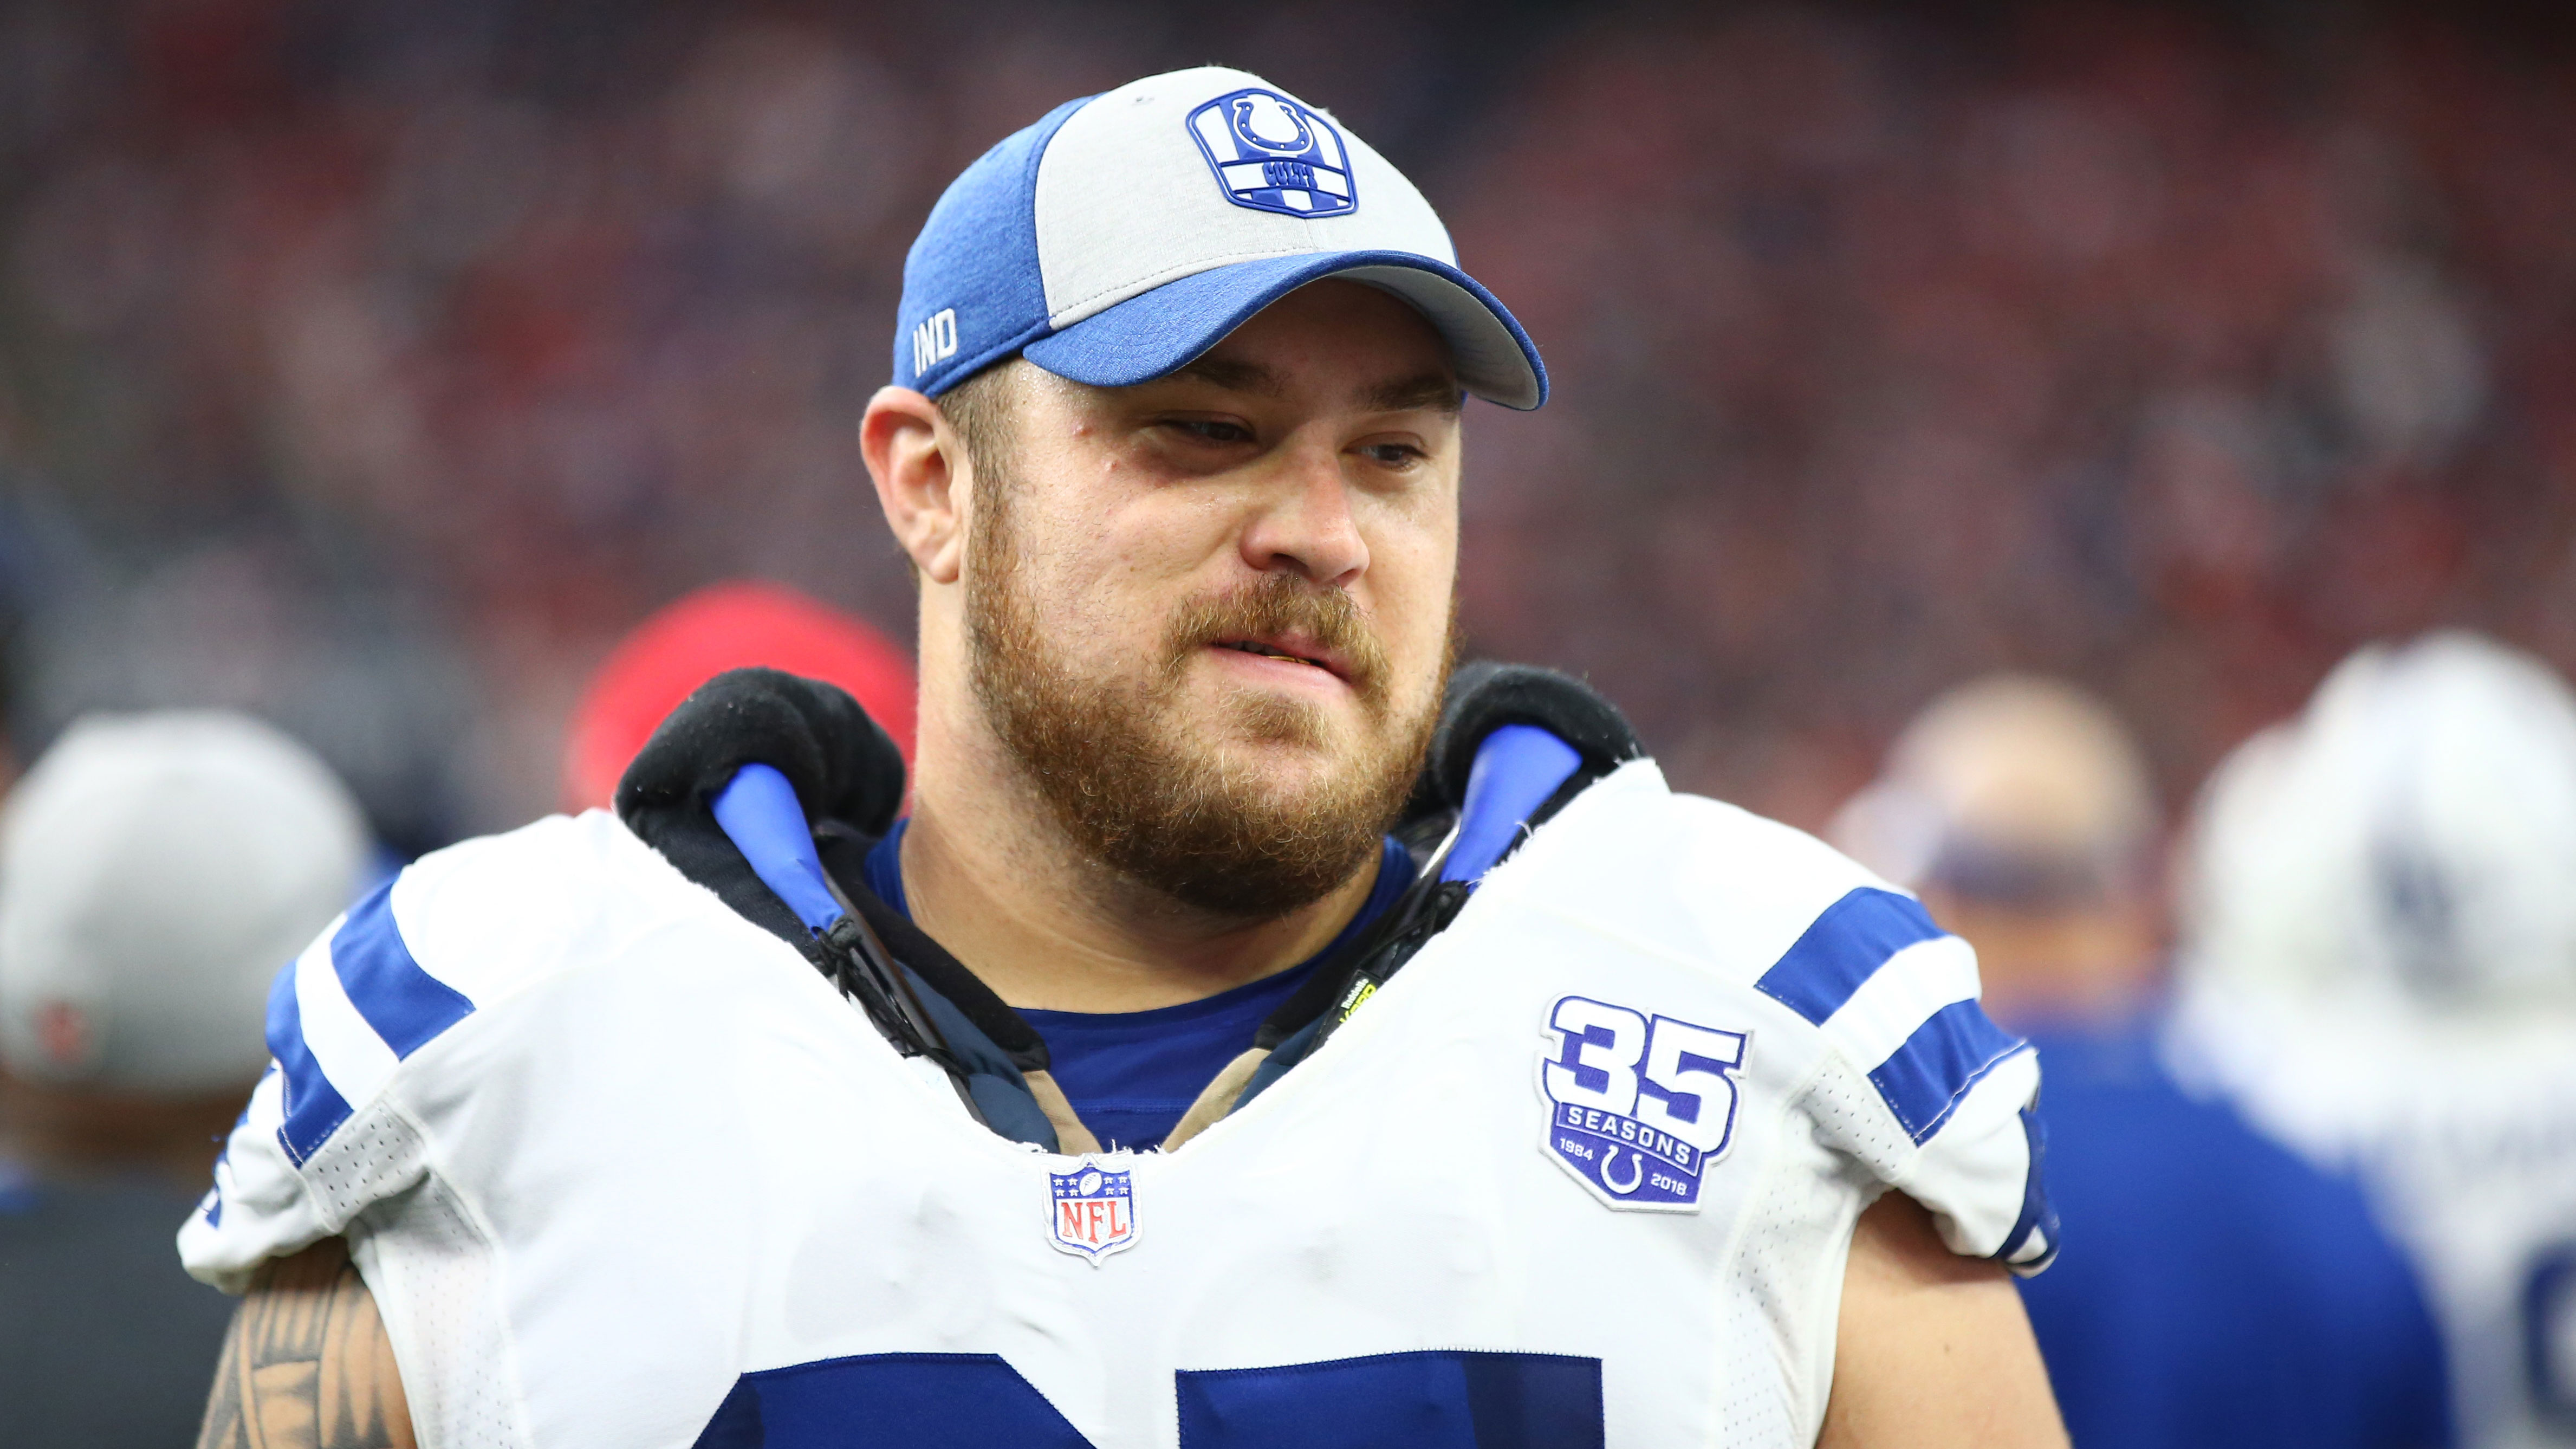 Colts trade offensive lineman Boehm to Dolphins for 2020 draft pick